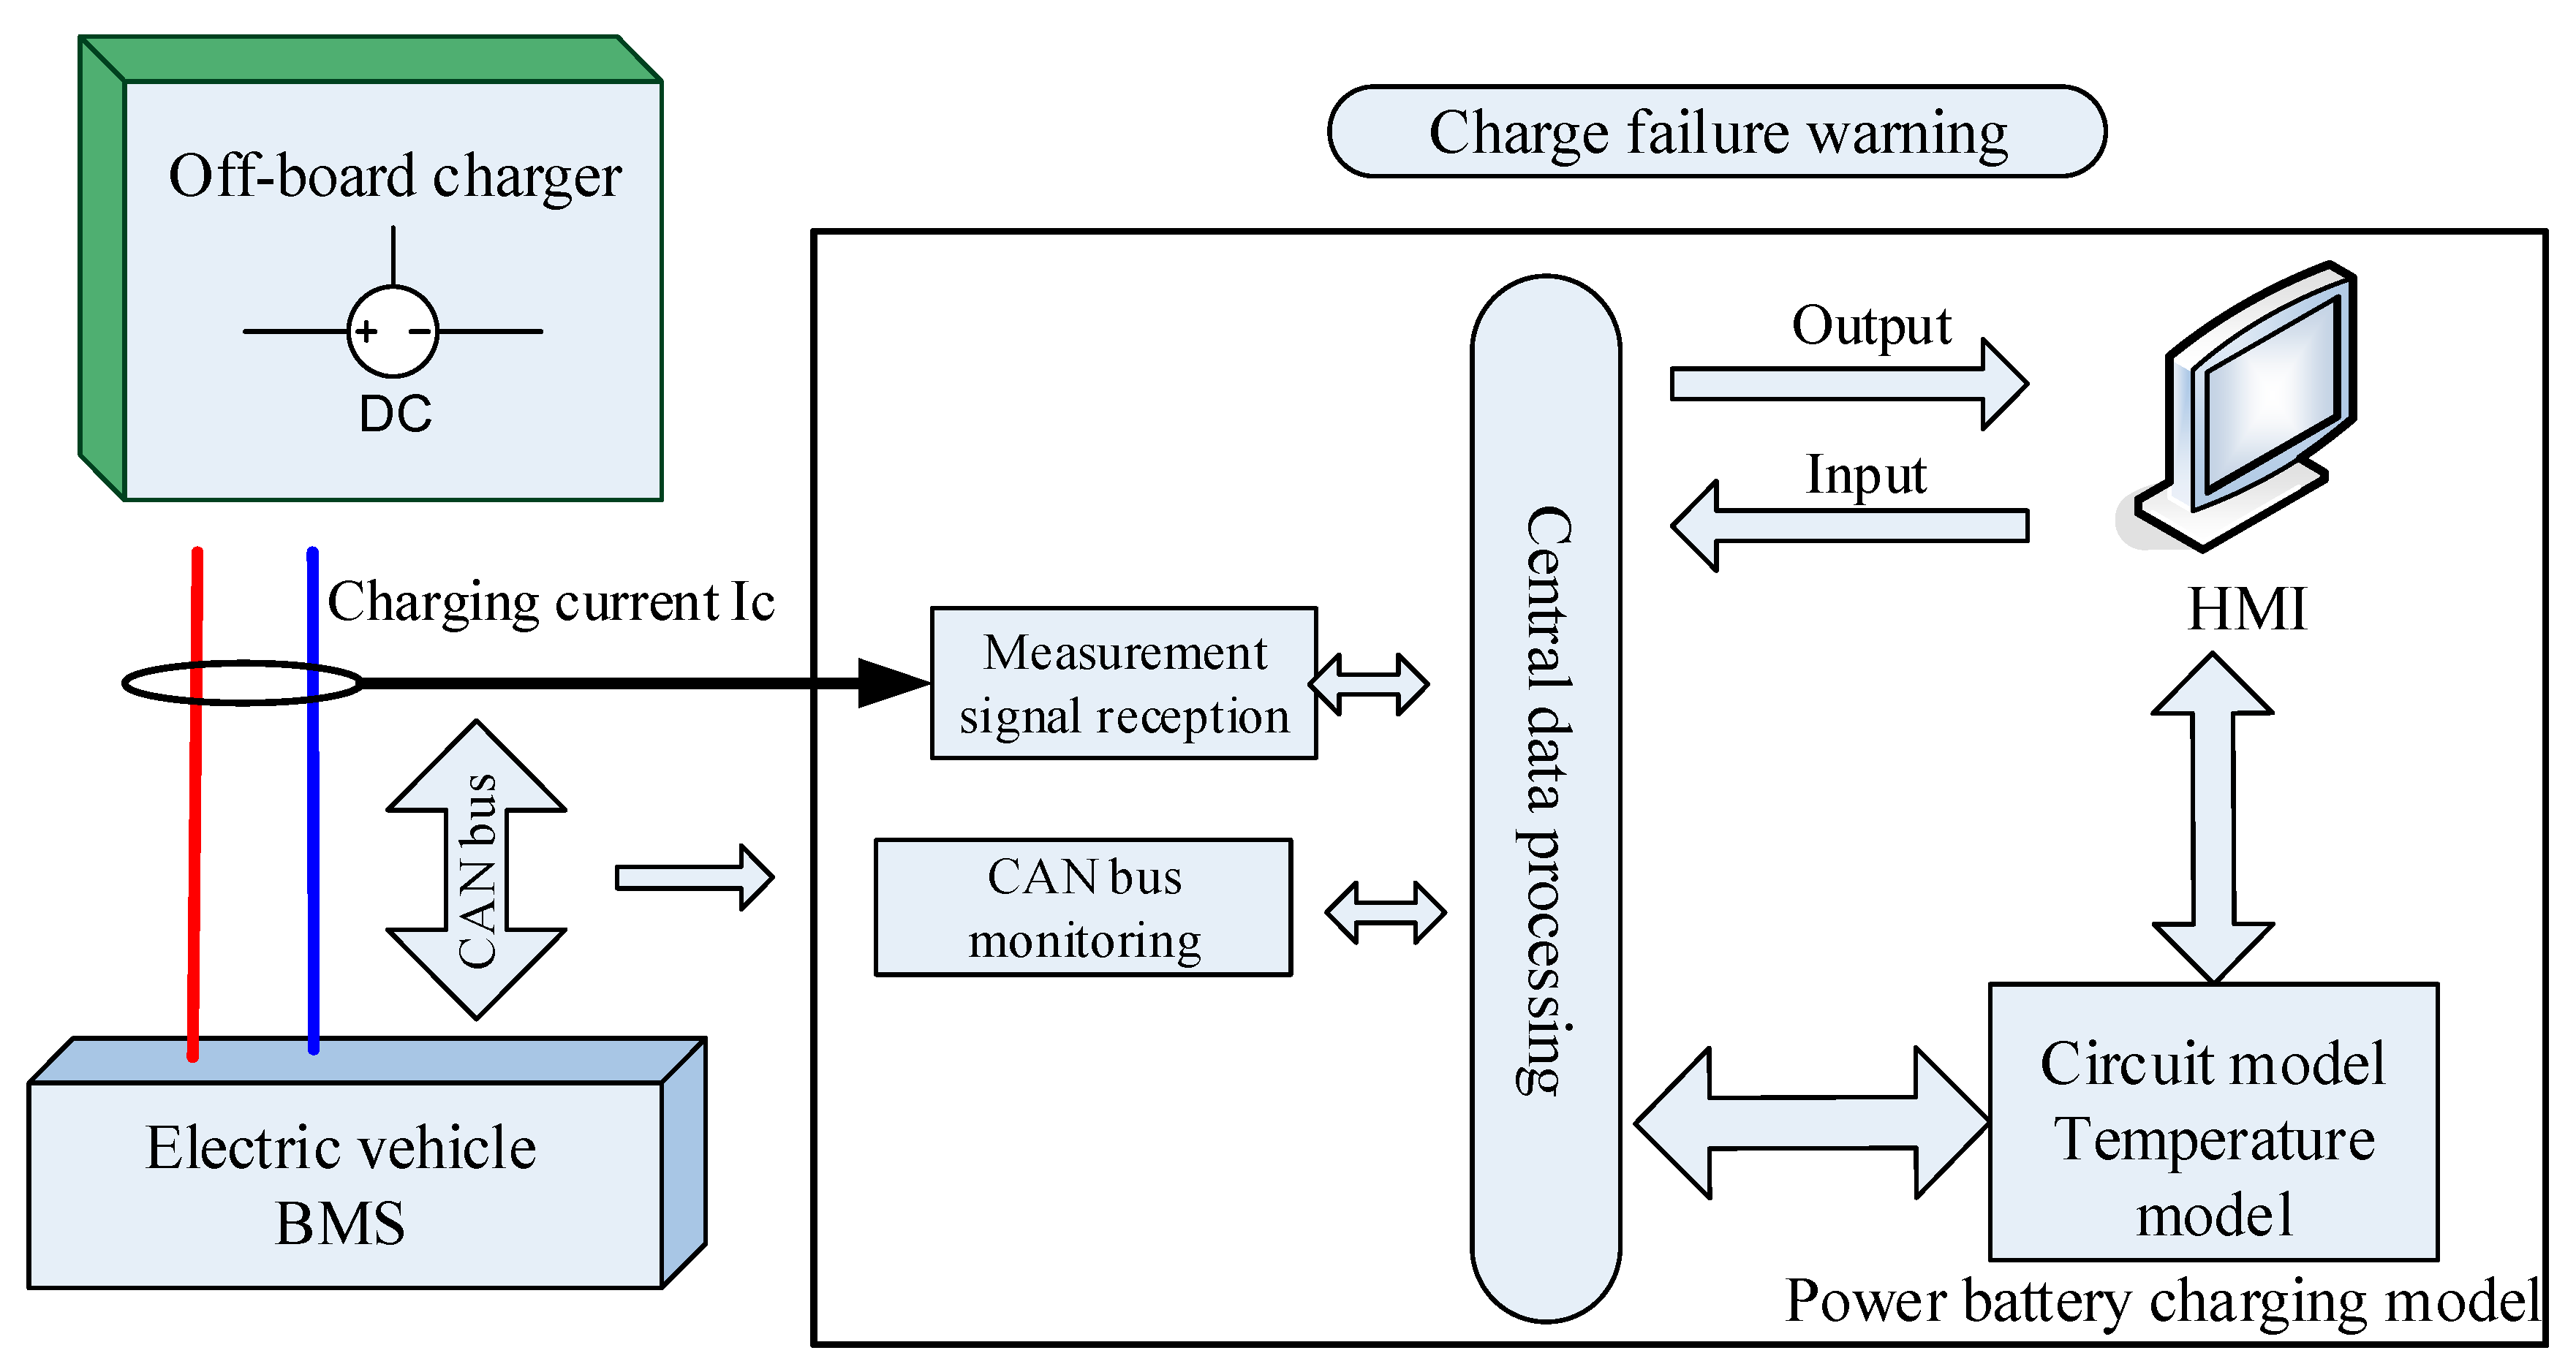 WEVJ Free FullText Electric Vehicle Charging Fault Monitoring and